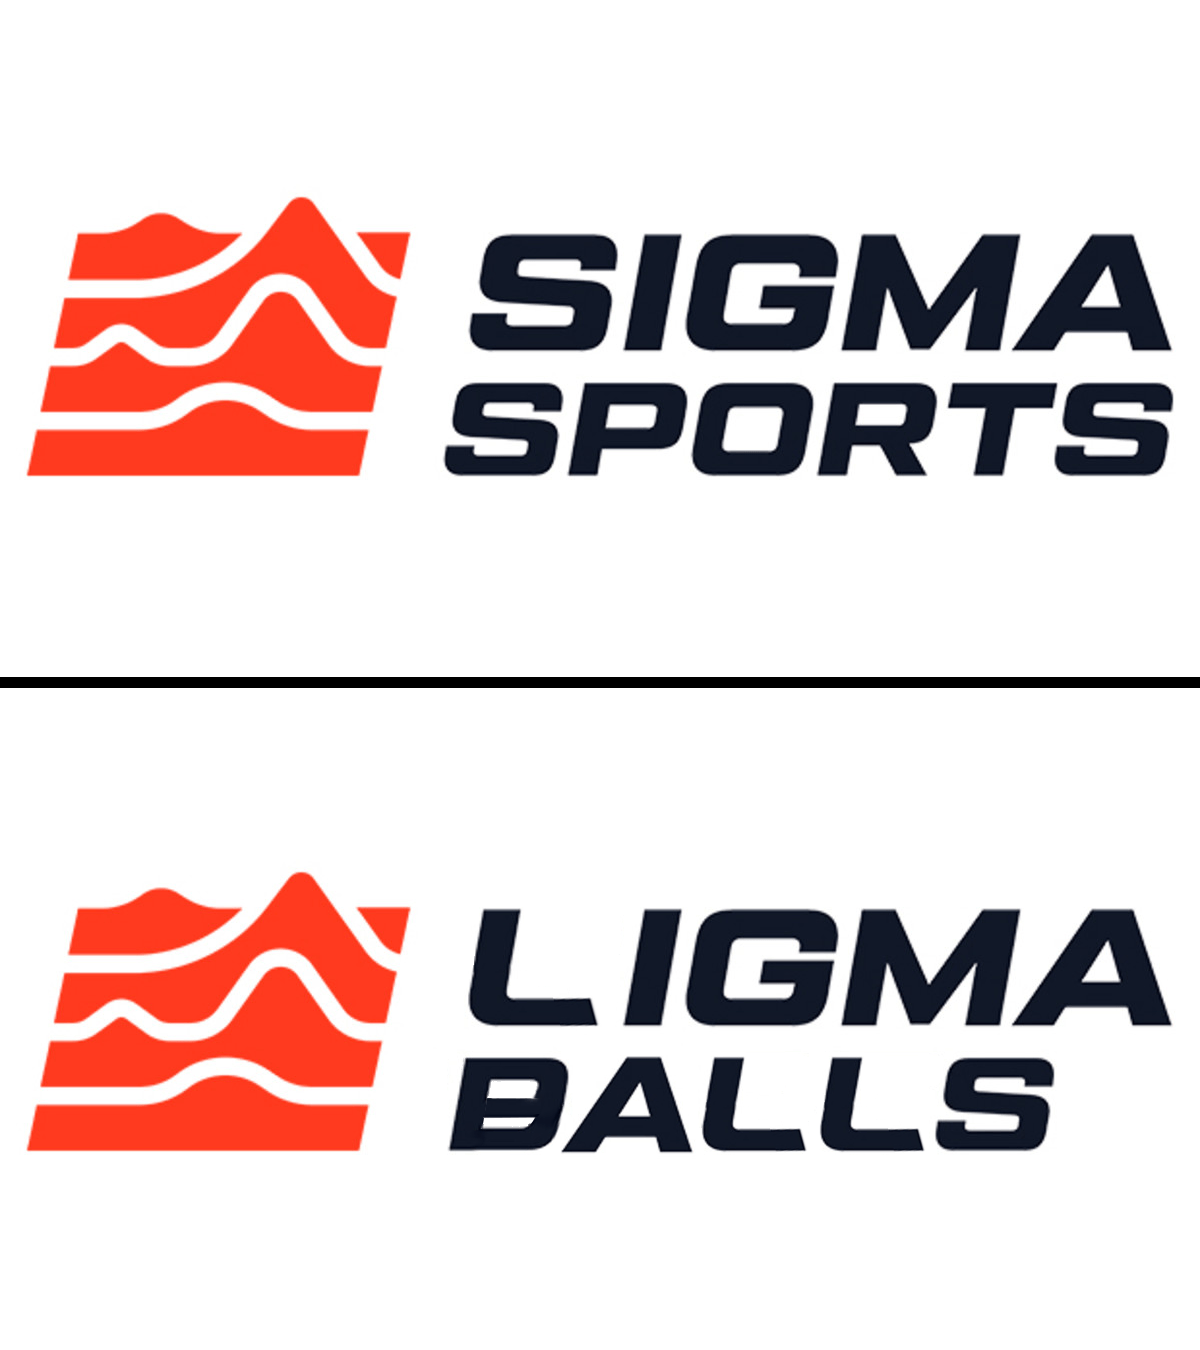 Well Known Sports Logo - Included the original logo since it's not as well known : sbubby